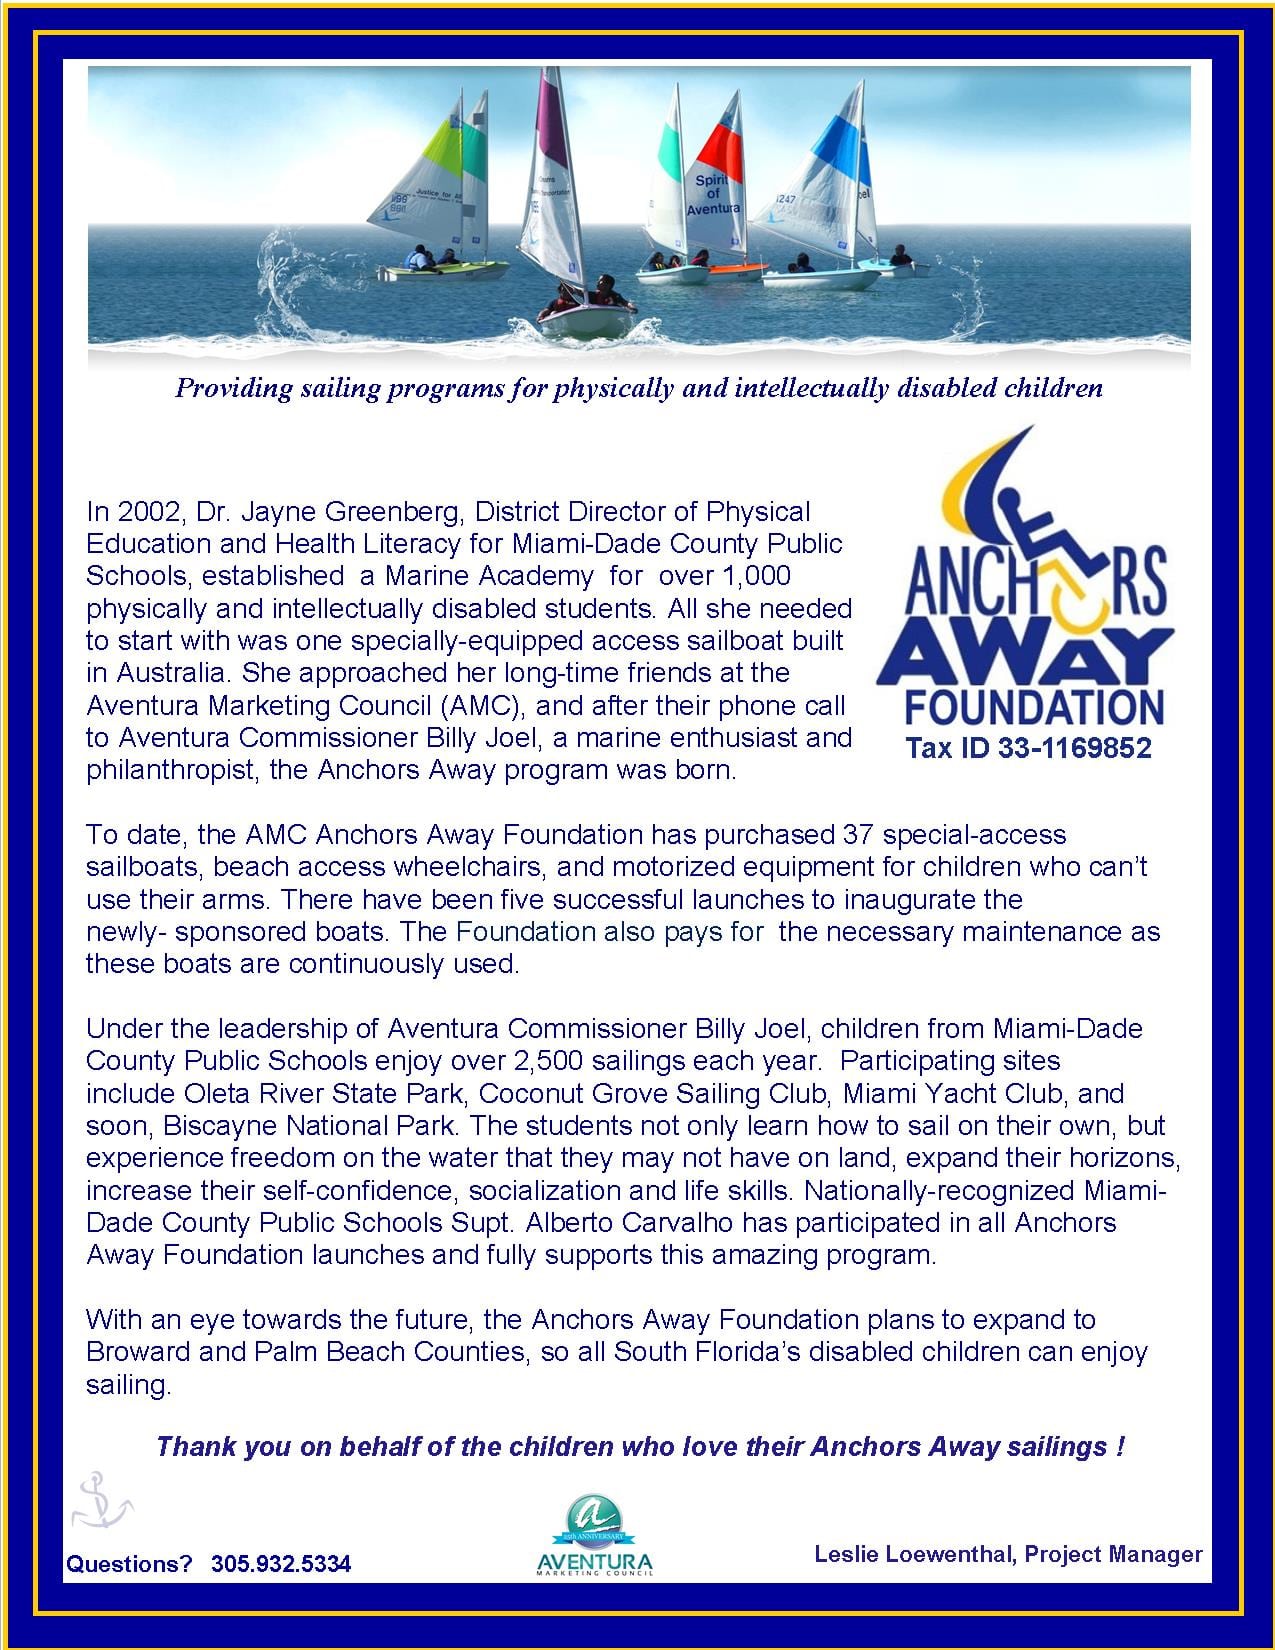 Anchors Away Foundation